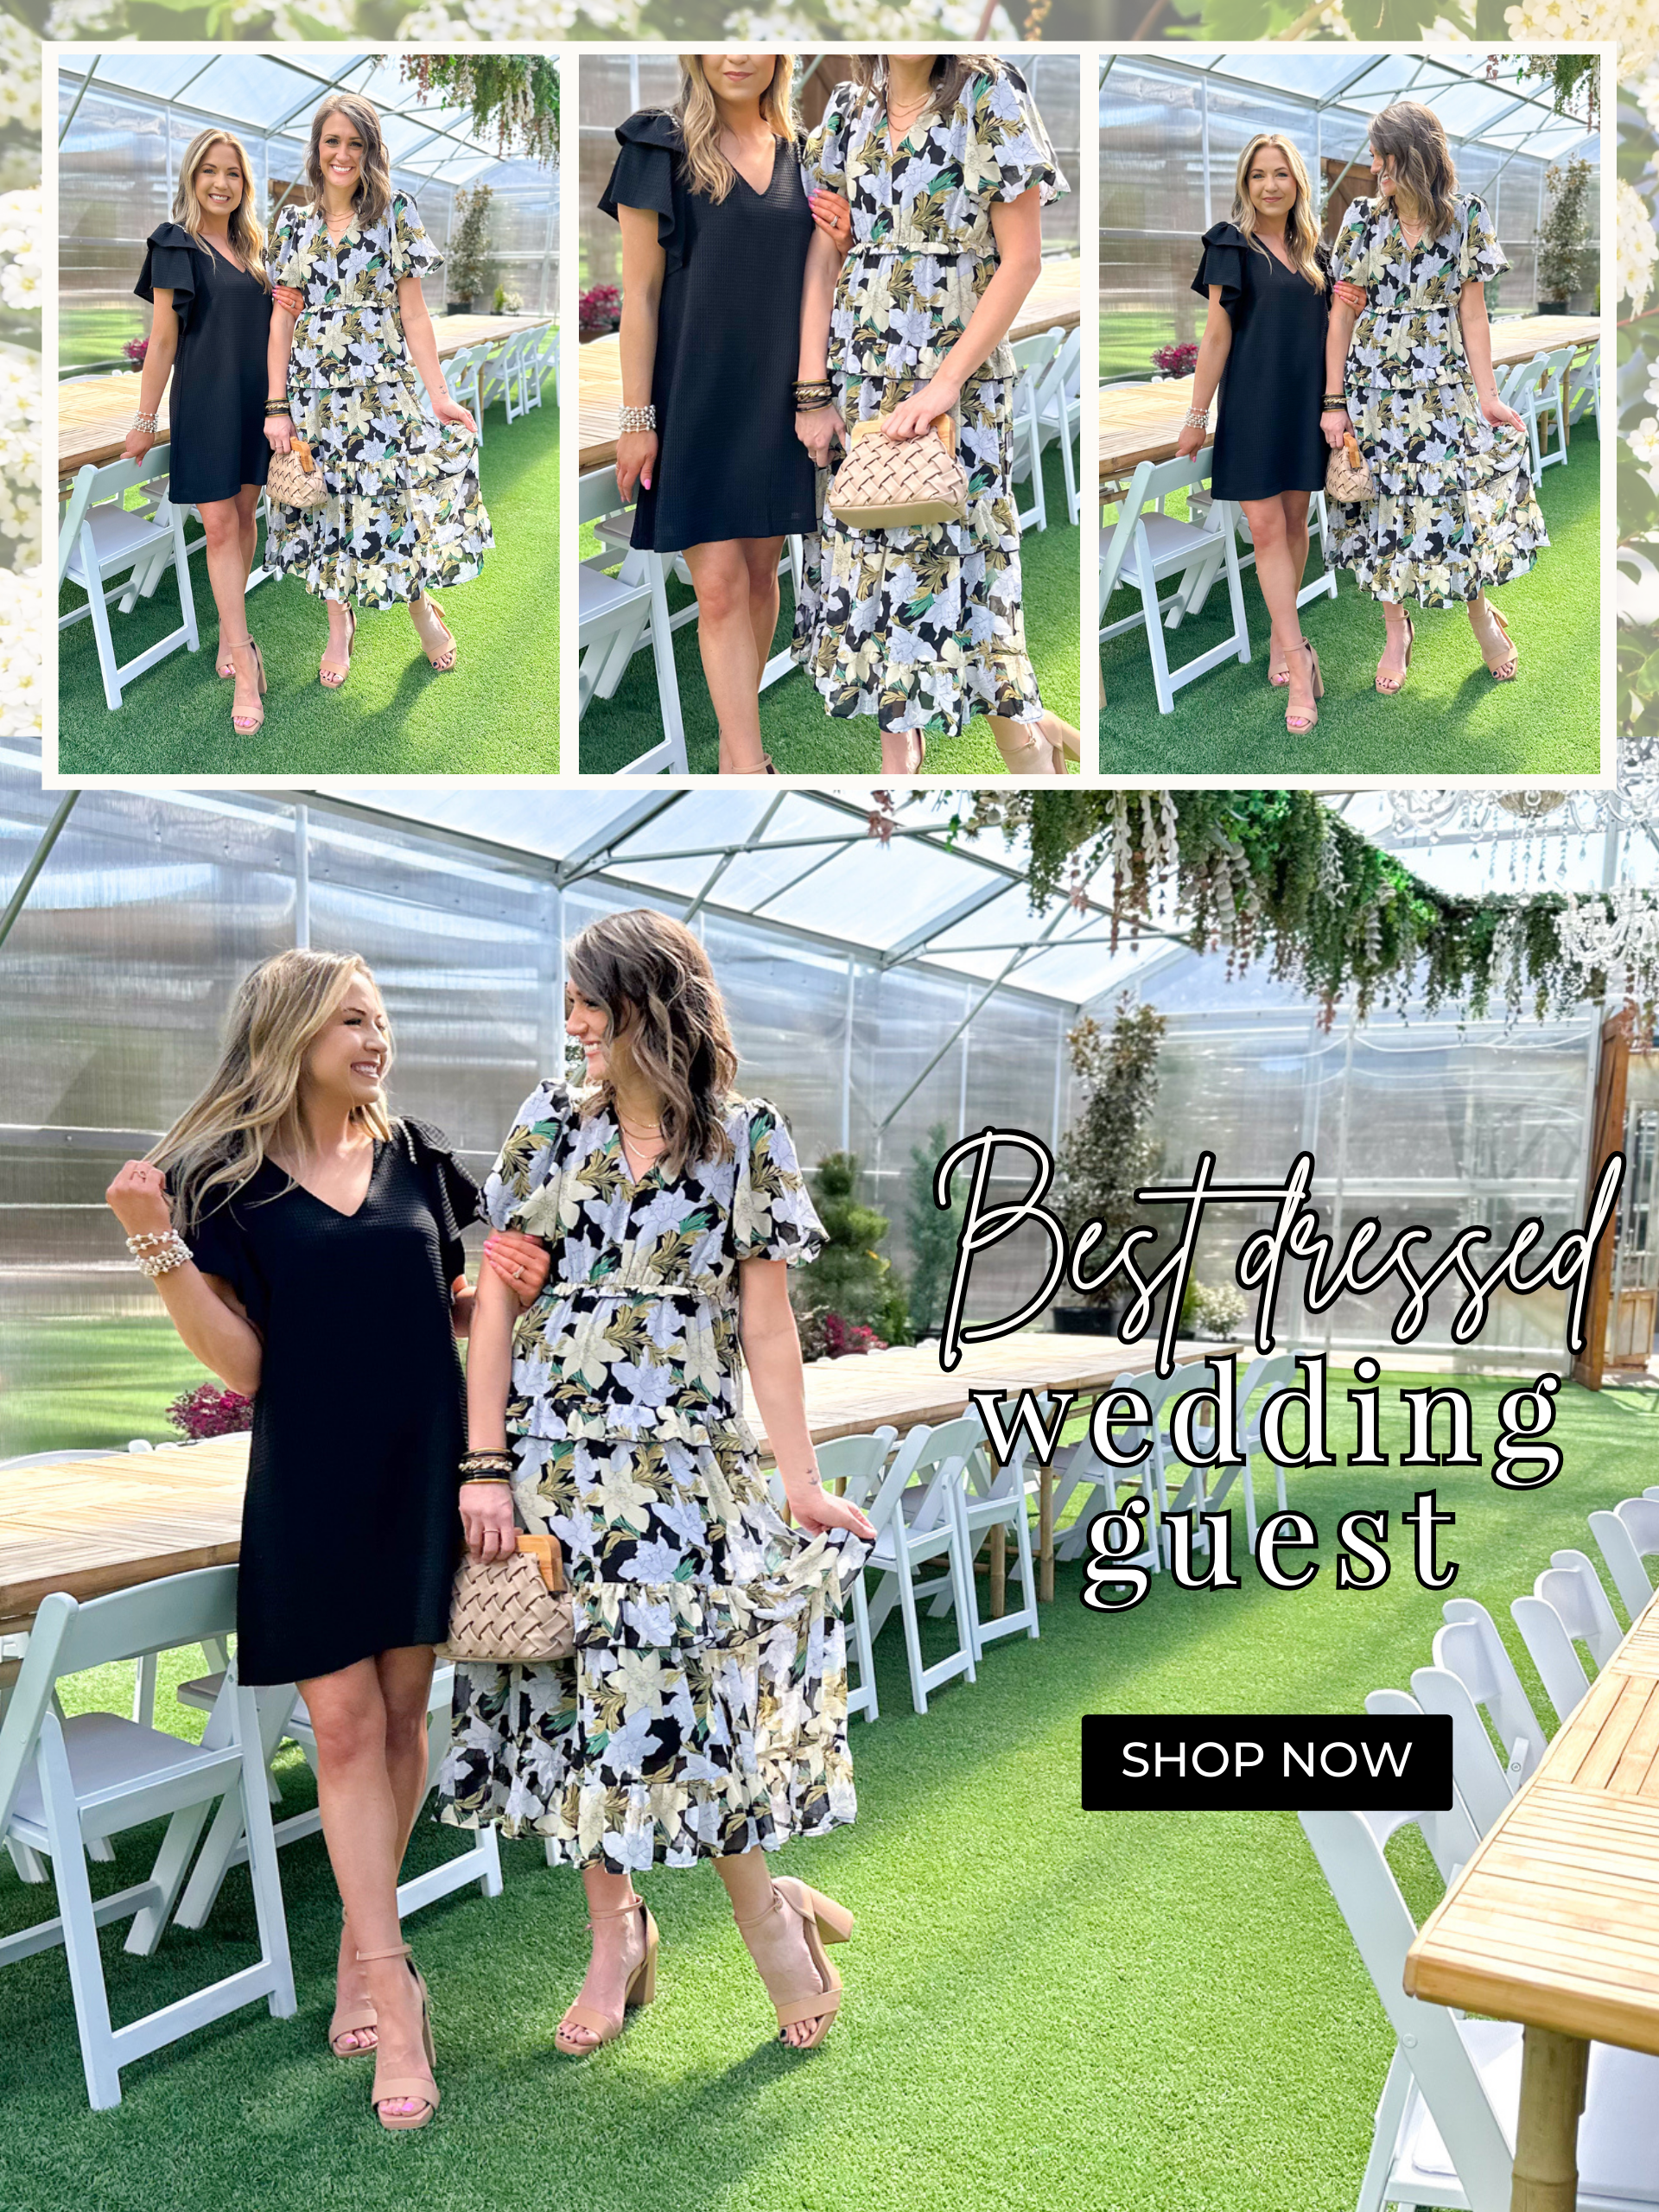 Best dressed wedding guest! Shop now. Models wearing a mini caged black dress with ruffle sleeve detail and pearls over the shoulders. Model wearing a floral printed tiered midi dress with a v-neck and flutter sleeves.